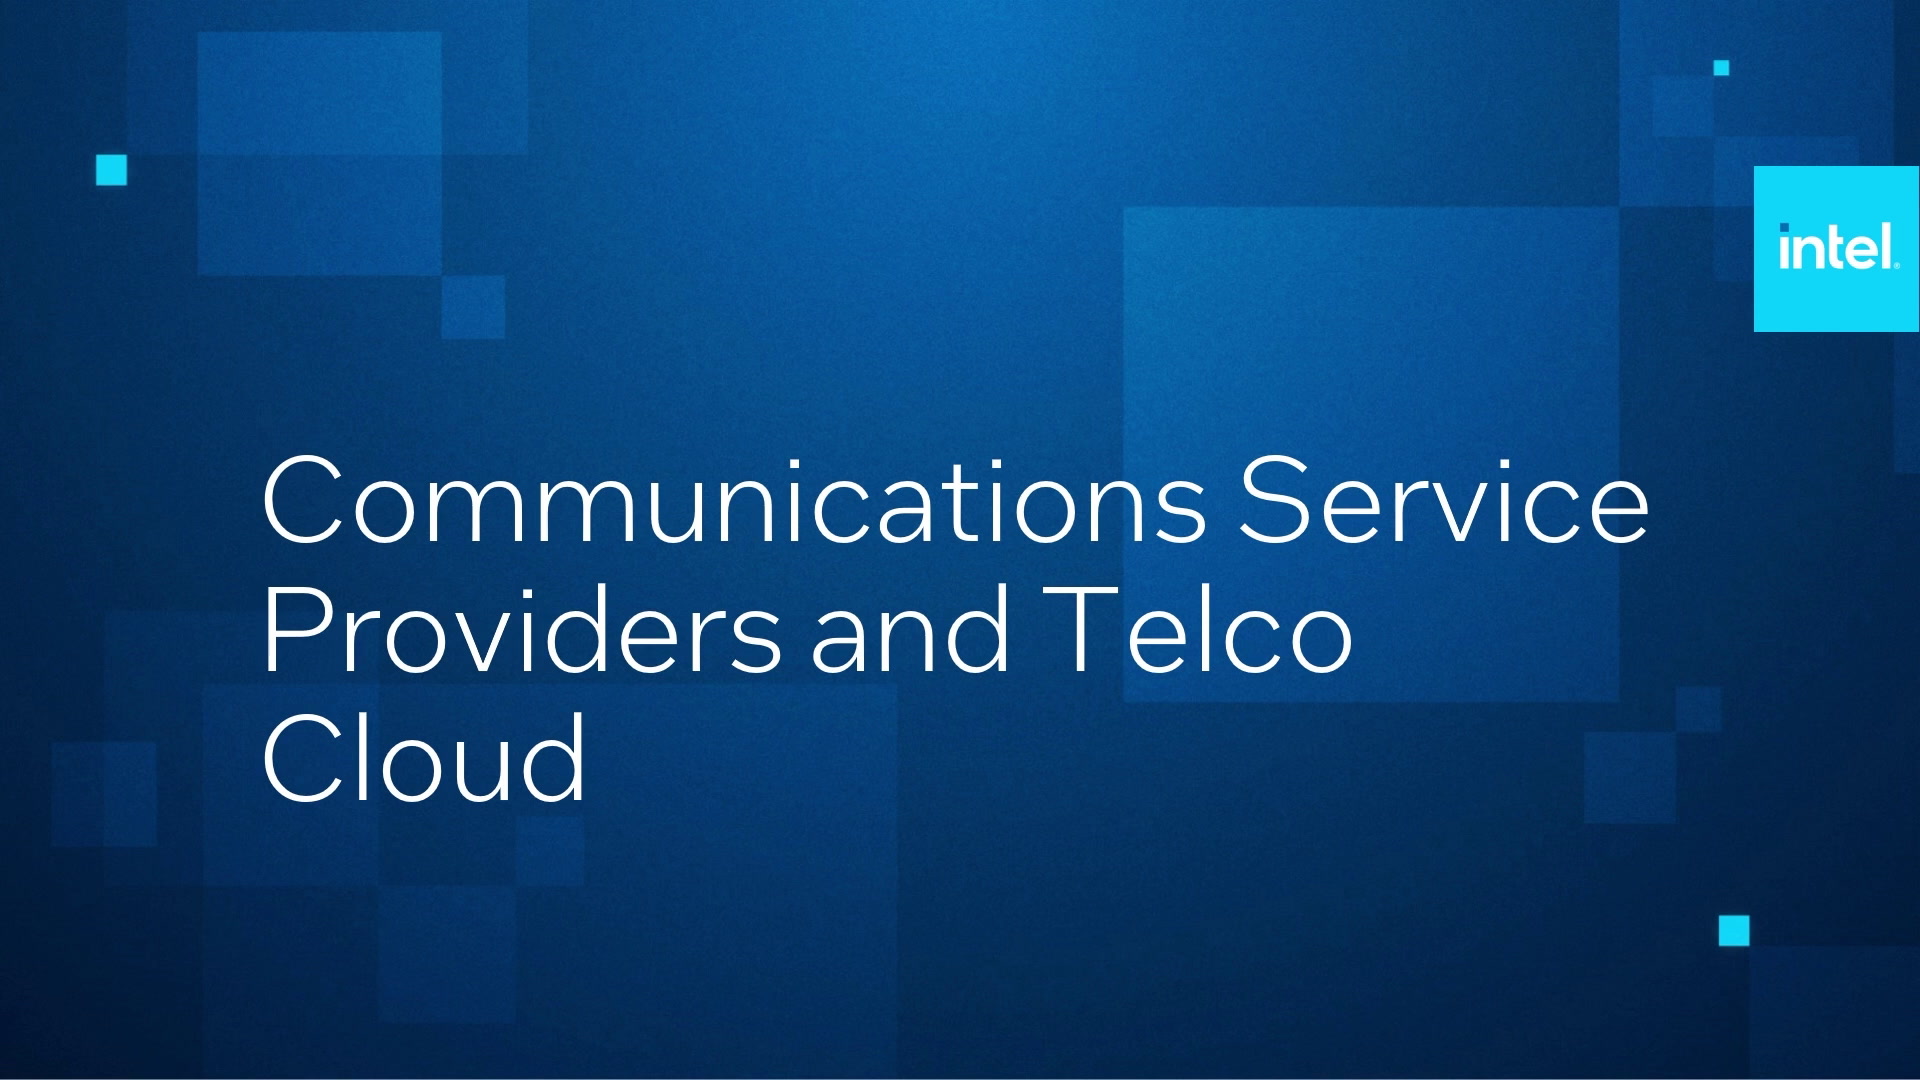 Communications Service Providers and the Telco Cloud